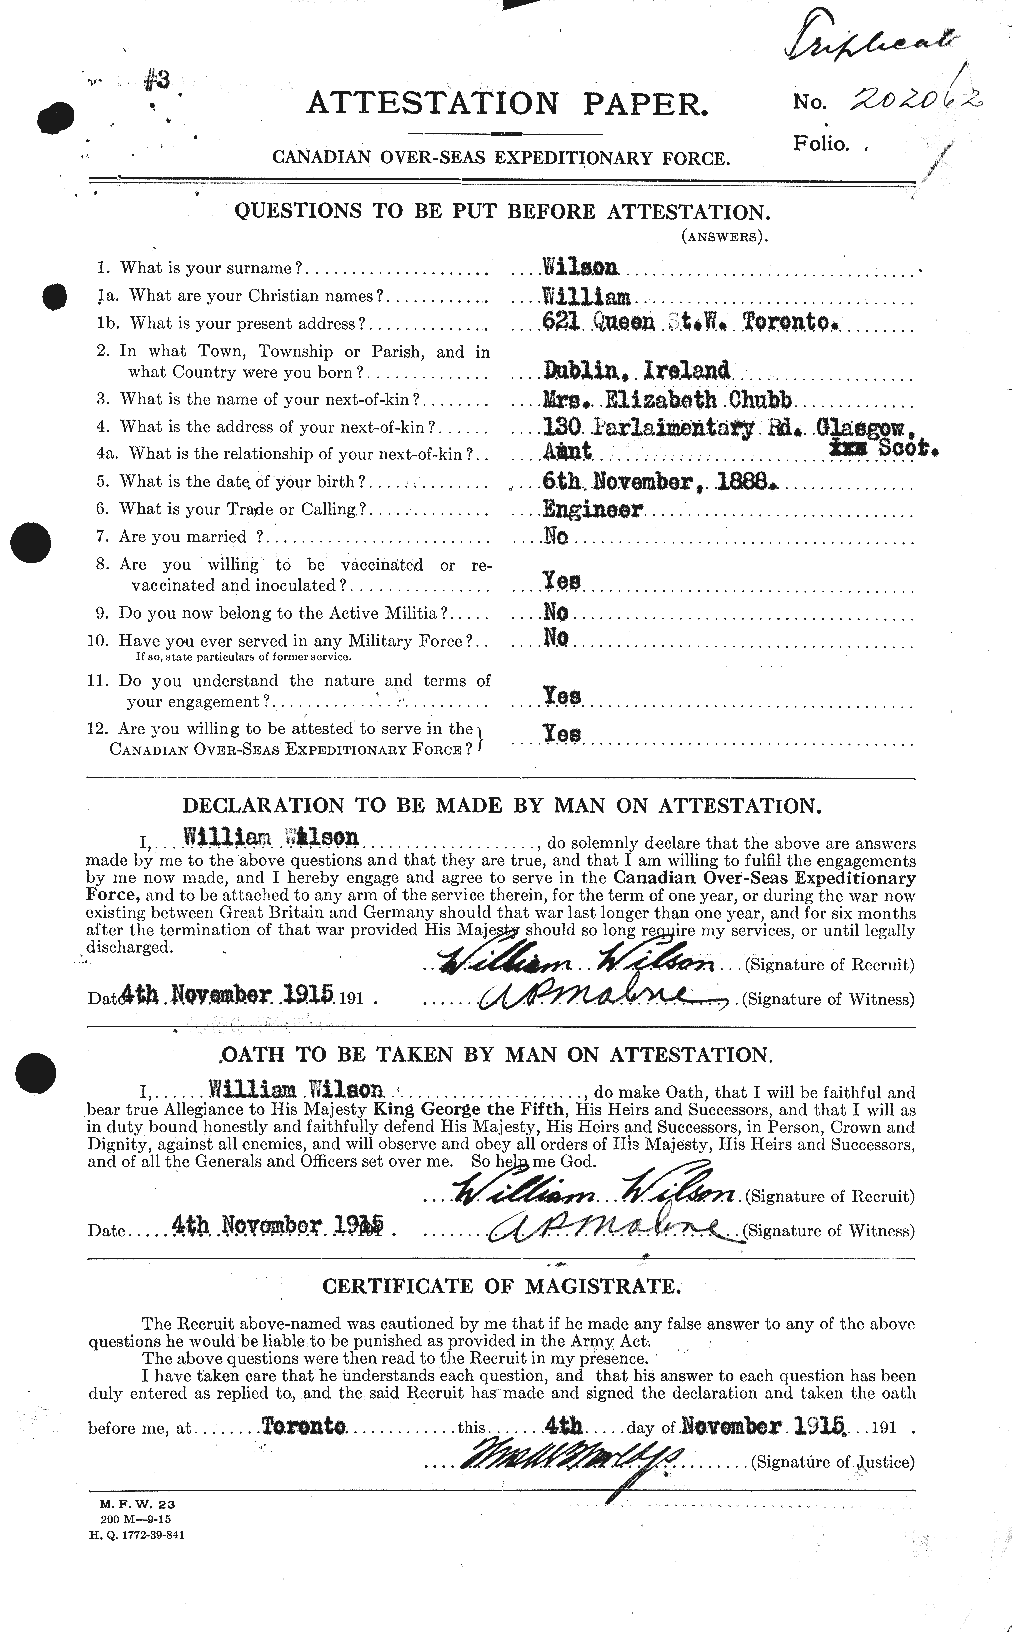 Personnel Records of the First World War - CEF 681840a